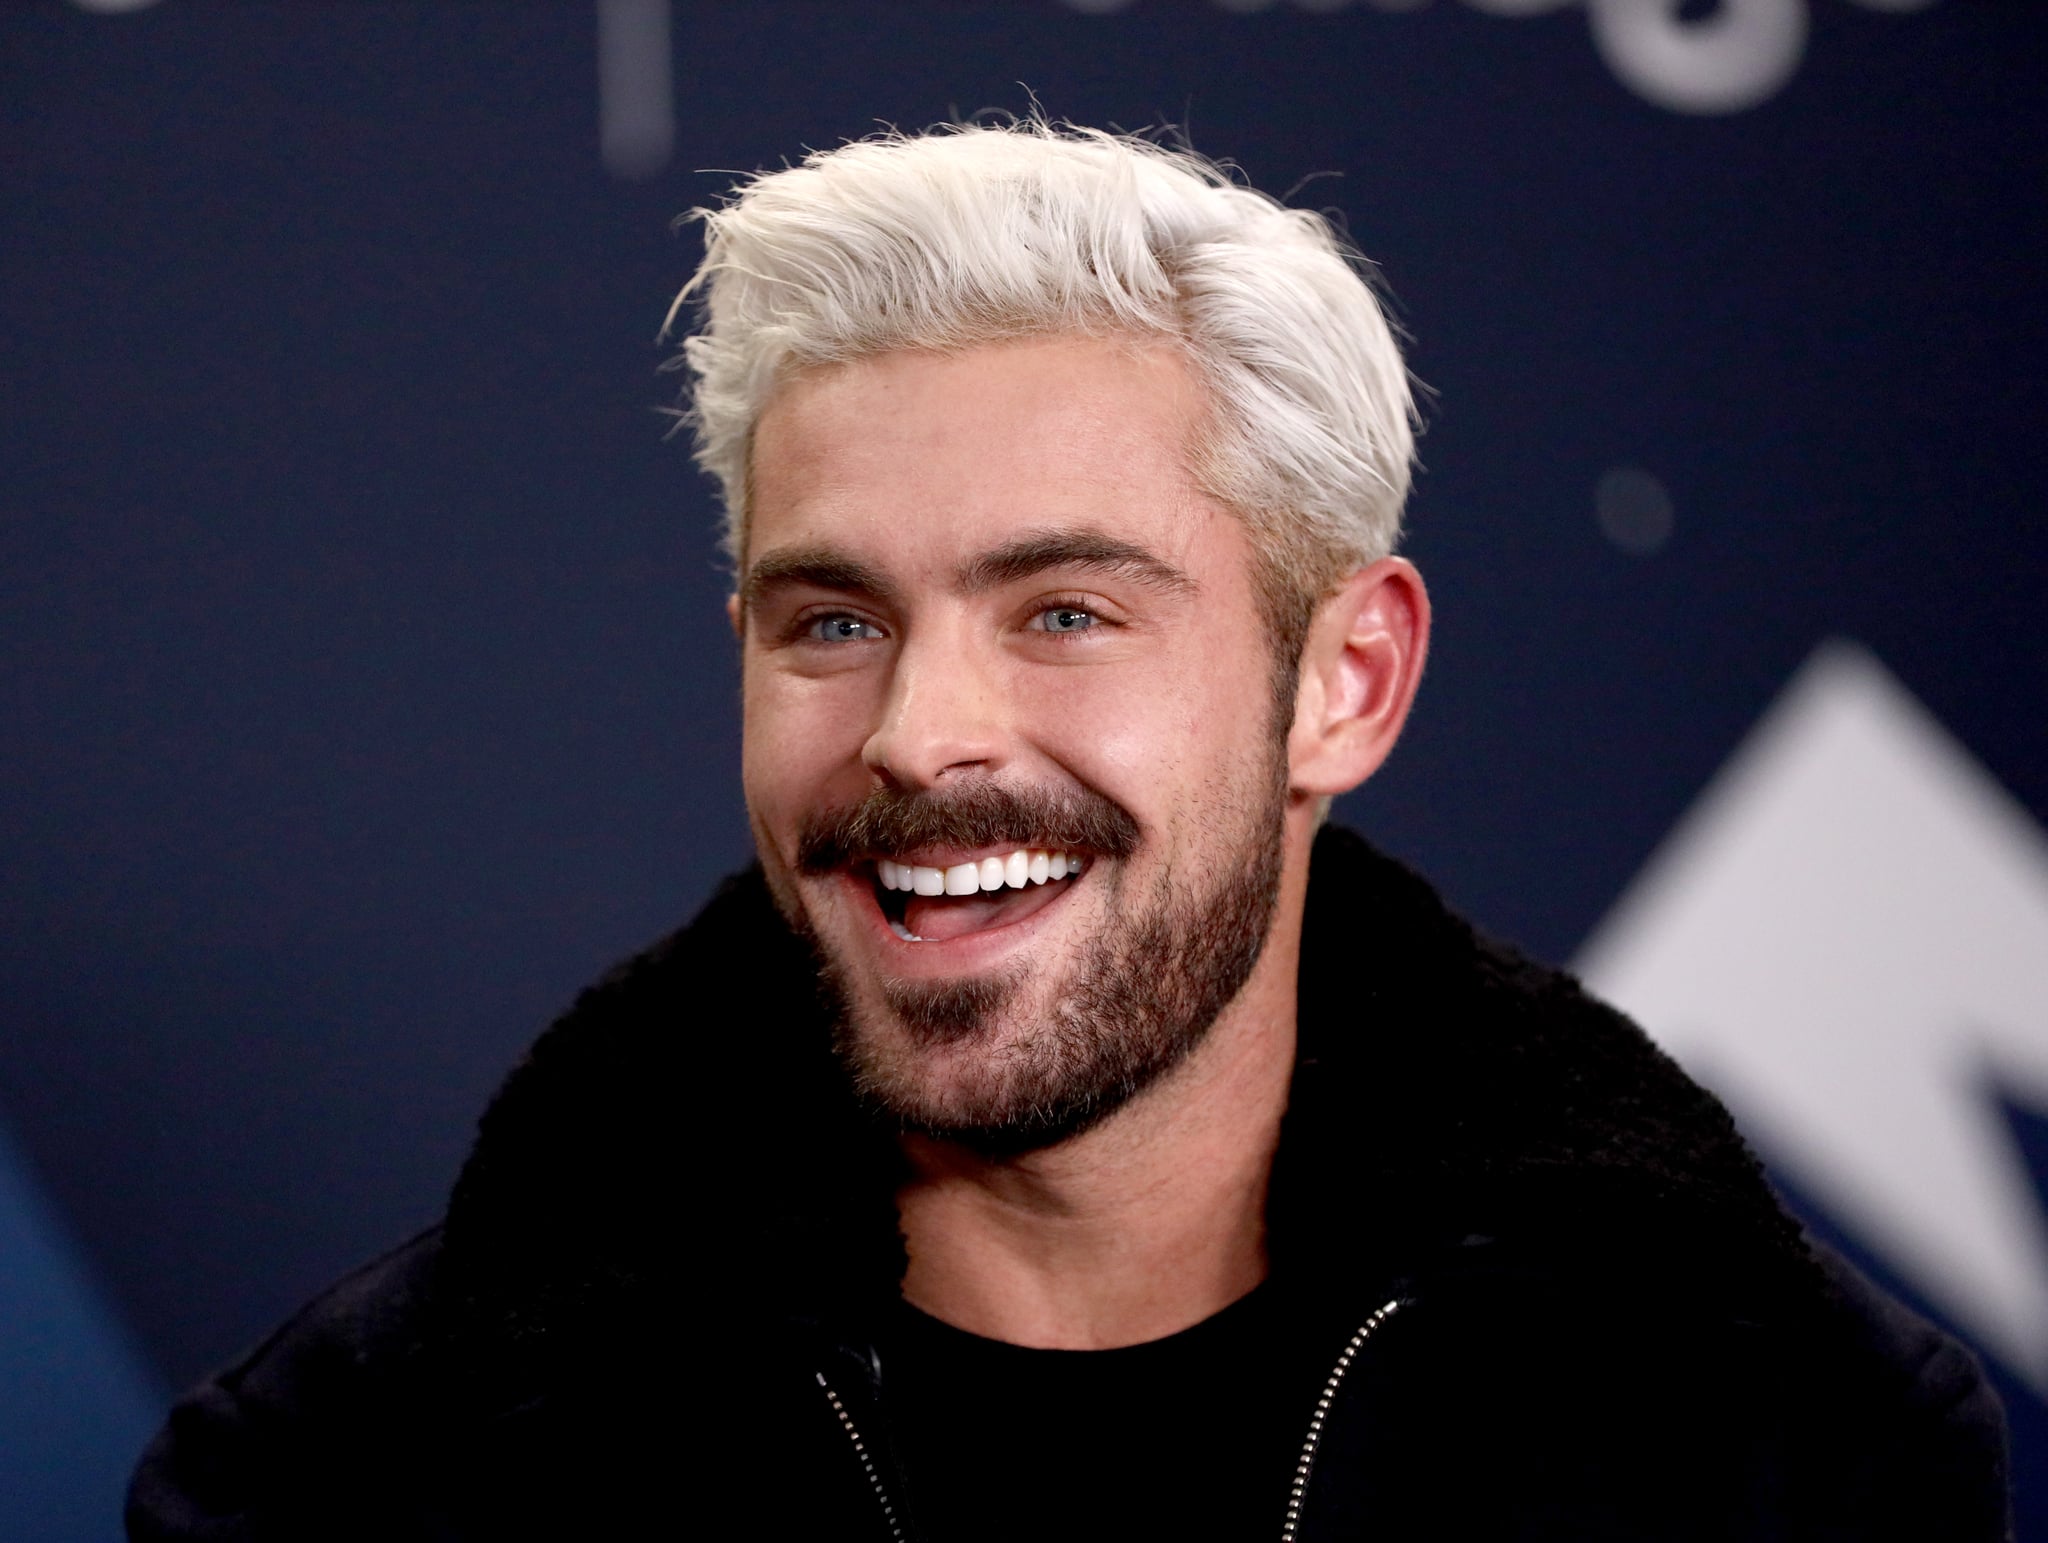 PARK CITY, UT - JANUARY 26:  Zac Efron of 'Extremely Wicked, Shockingly Evil and Vile' attends The IMDb Studio at Acura Festival Village on location at The 2019 Sundance Film Festival - Day 2  on January 26, 2019 in Park City, Utah.  (Photo by Rich Polk/Getty Images for IMDb)